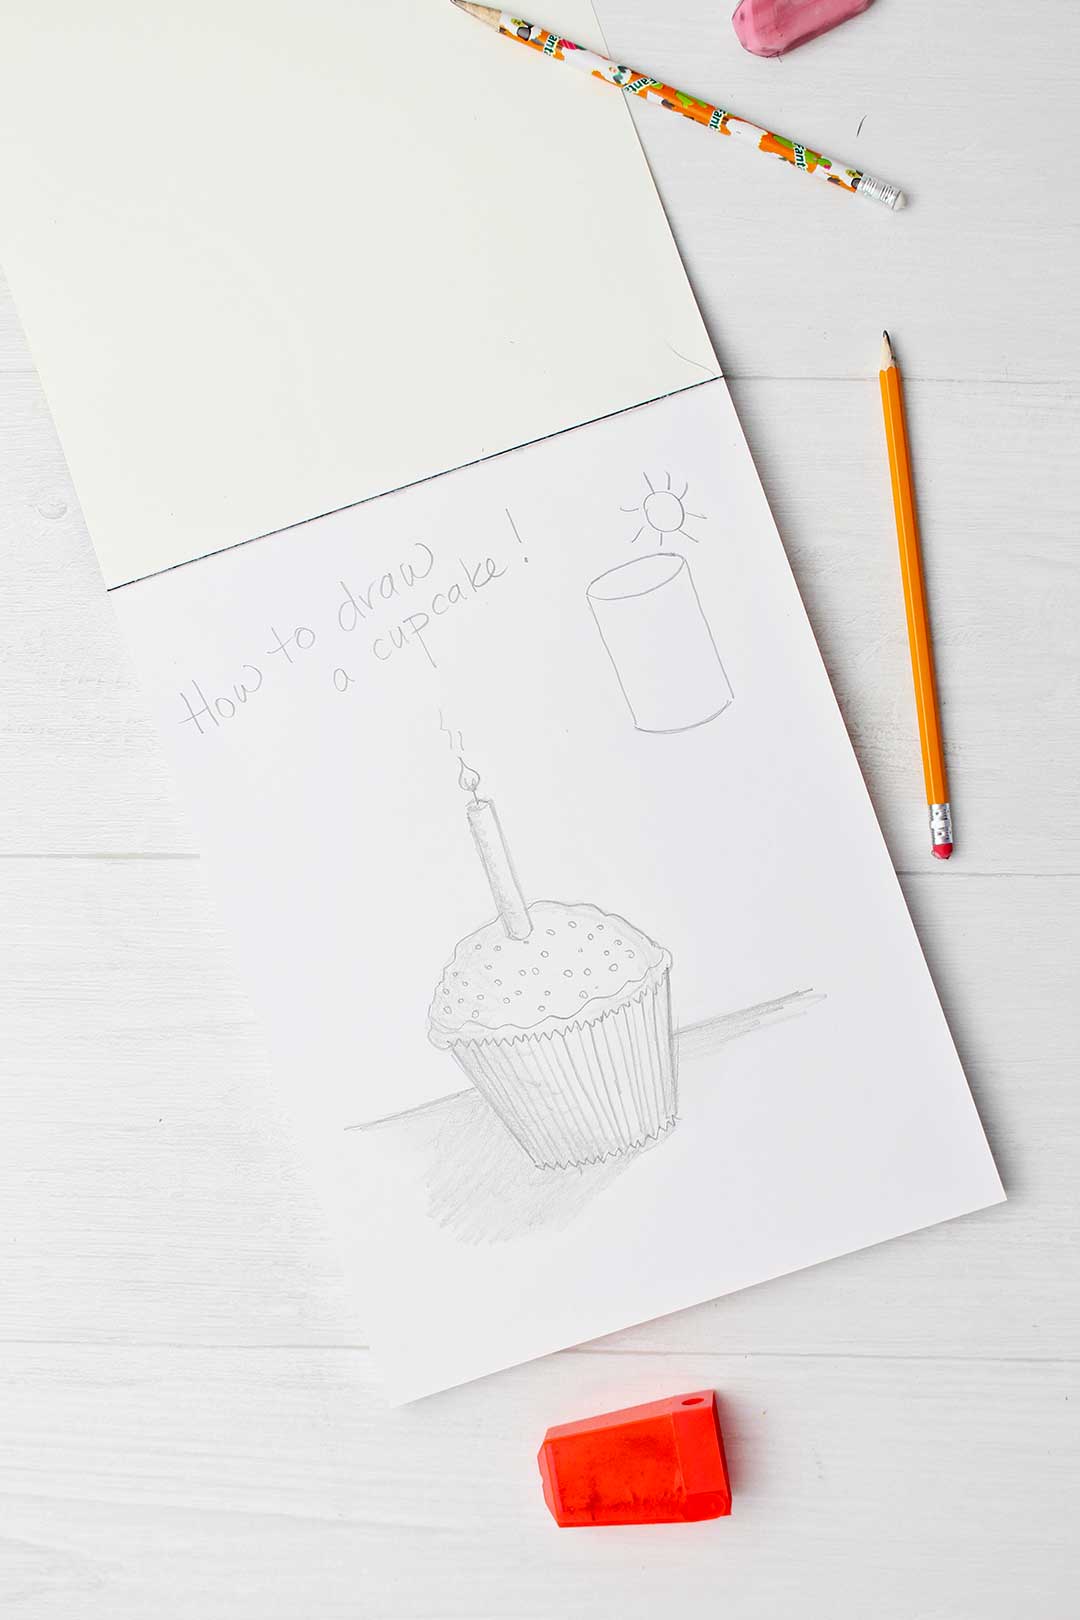 How to Draw a Cute Cupcake - Easy Drawing Tutorial For Kids